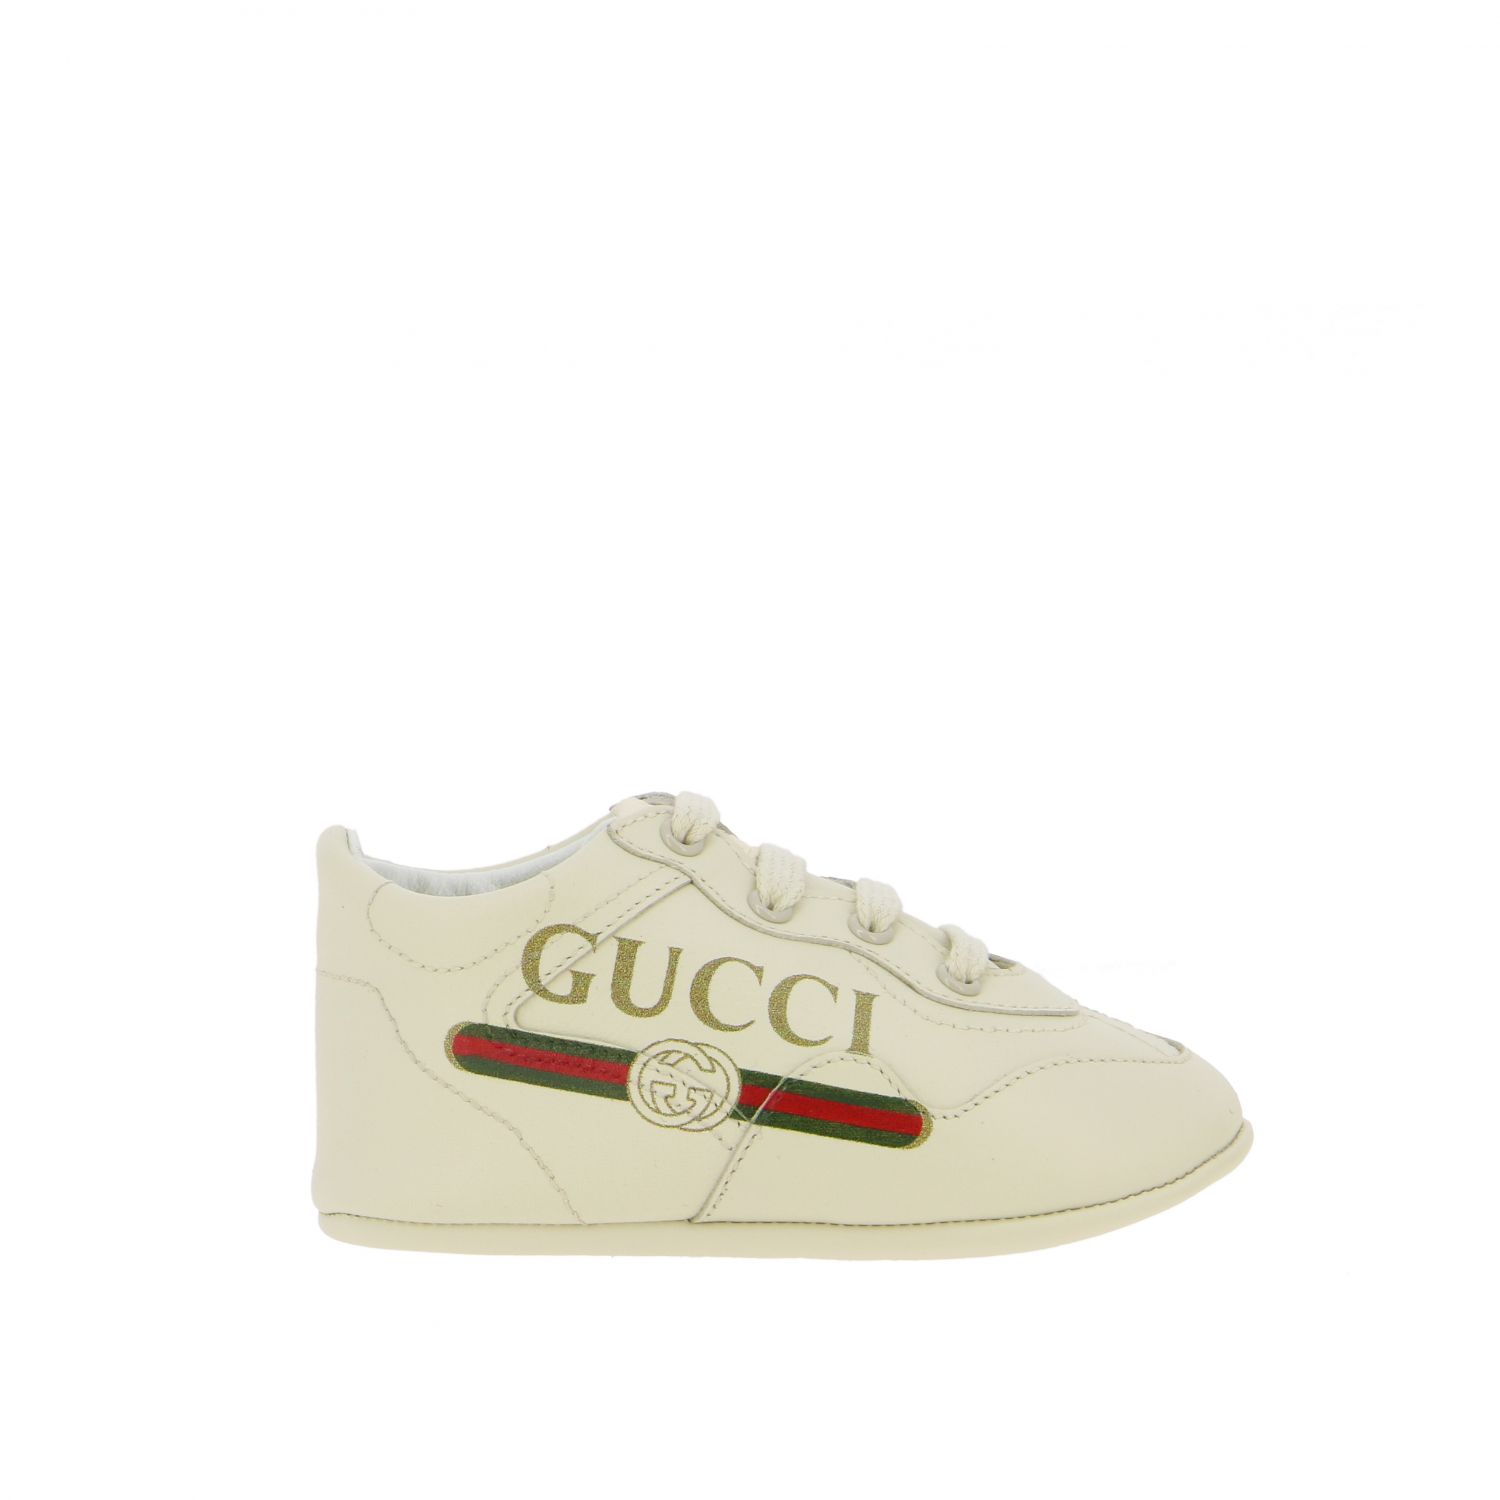 GUCCI: shoes for baby - Yellow Cream | Gucci shoes 612786 DRW00 online on  